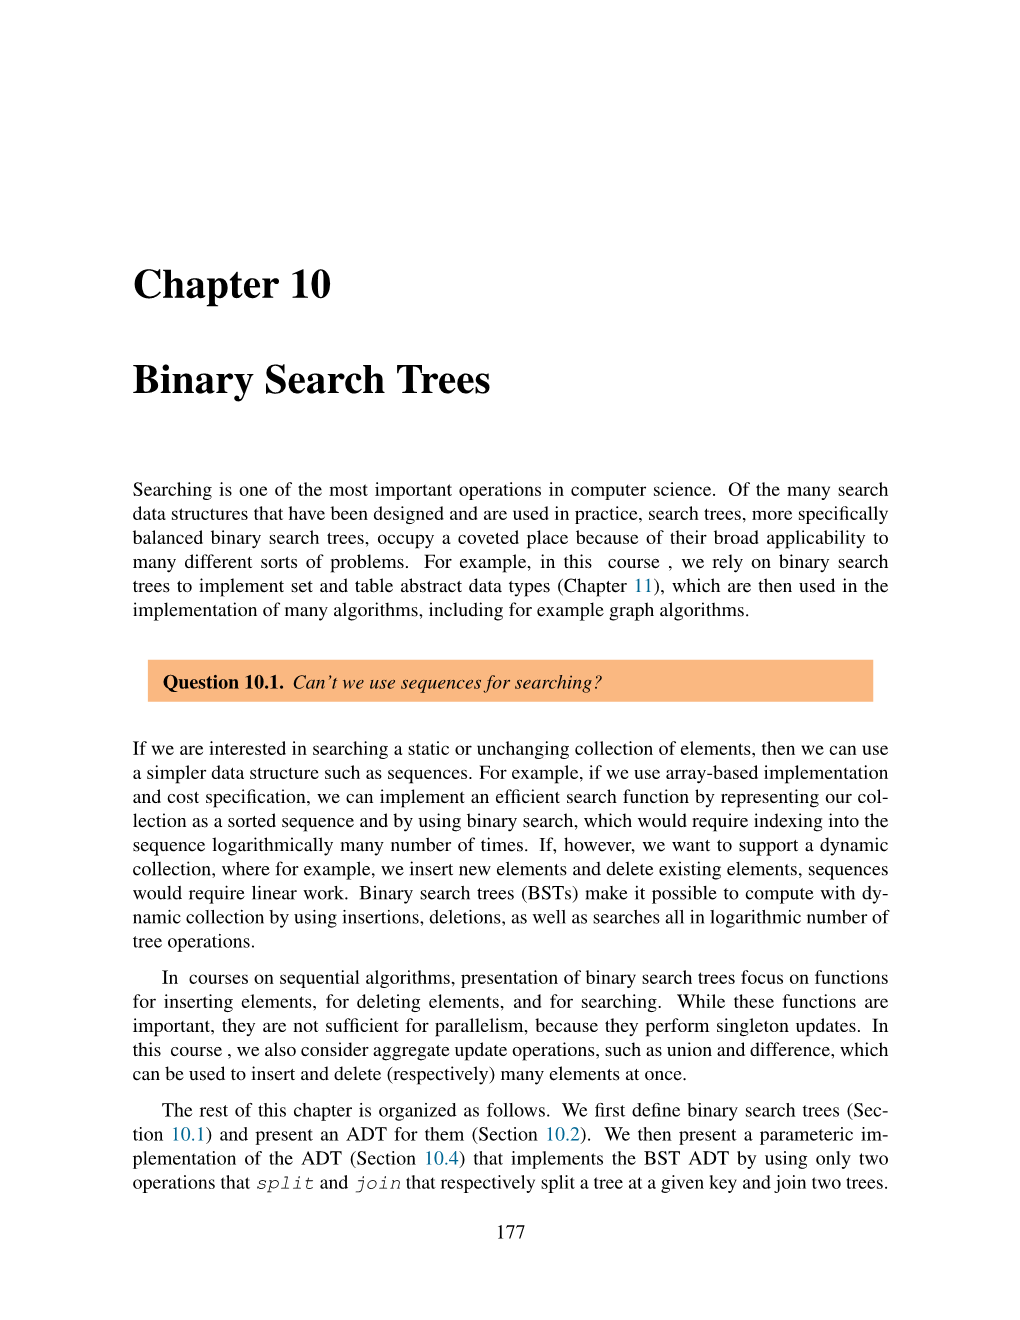 Chapter 10 Binary Search Trees